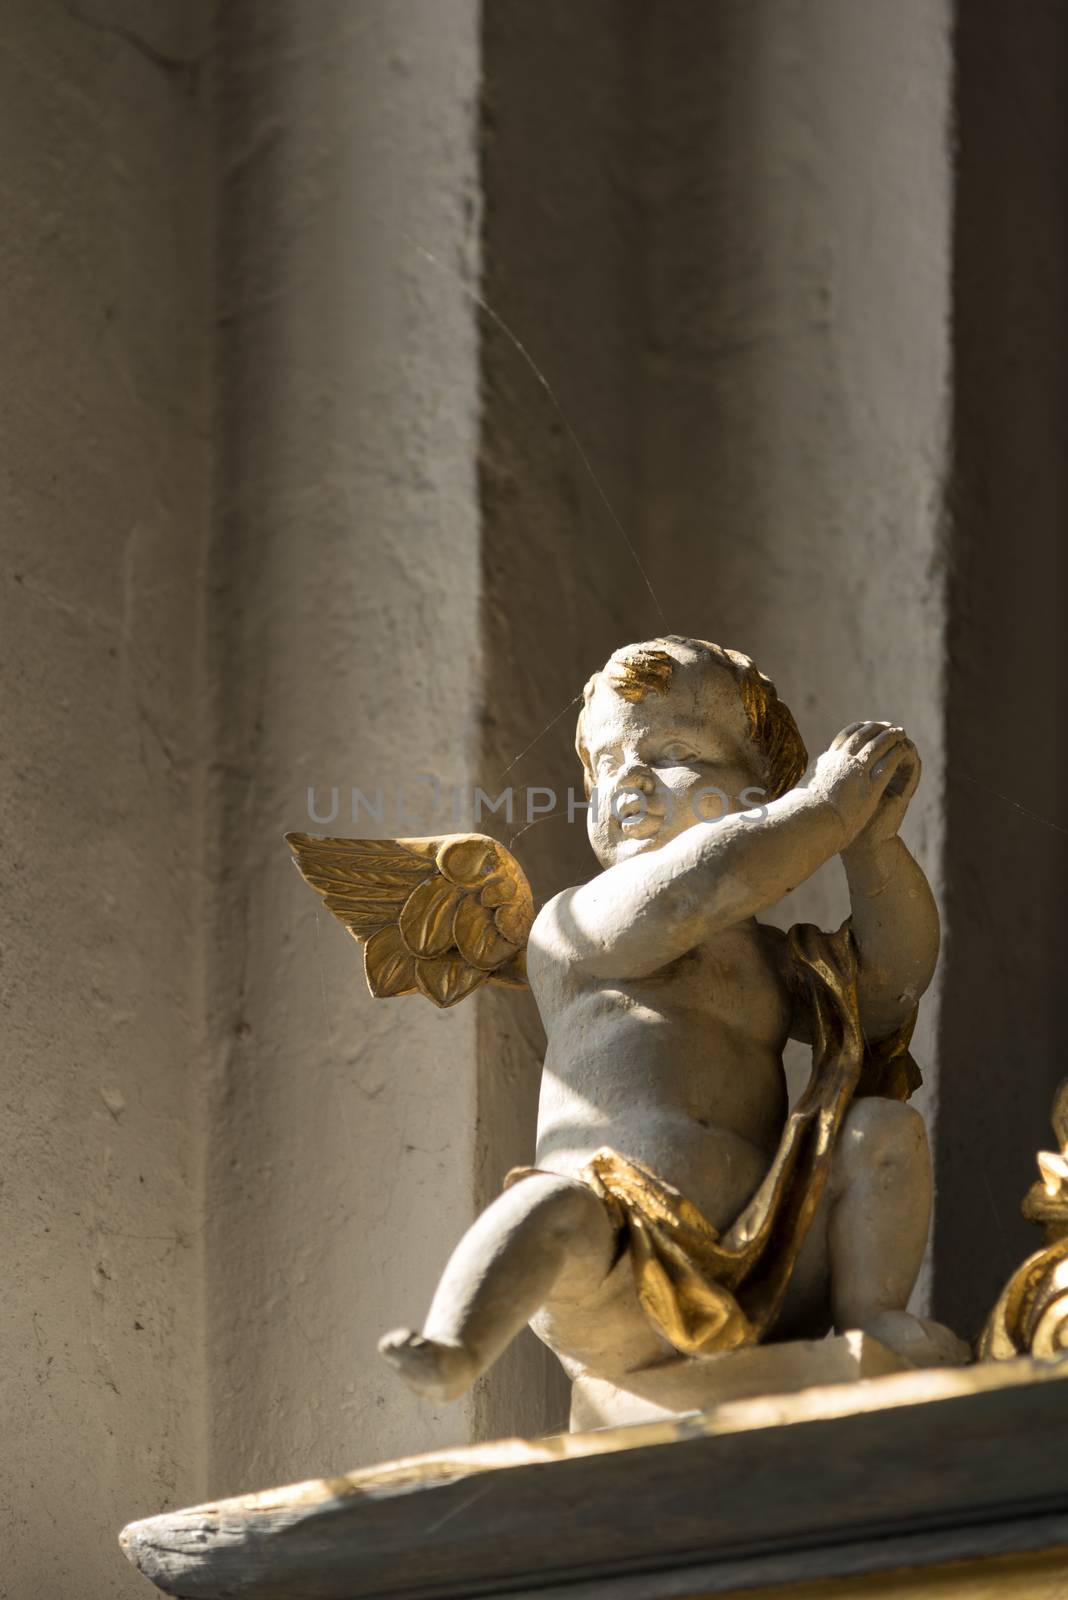 Image of Angel statue in a church in northern Germany